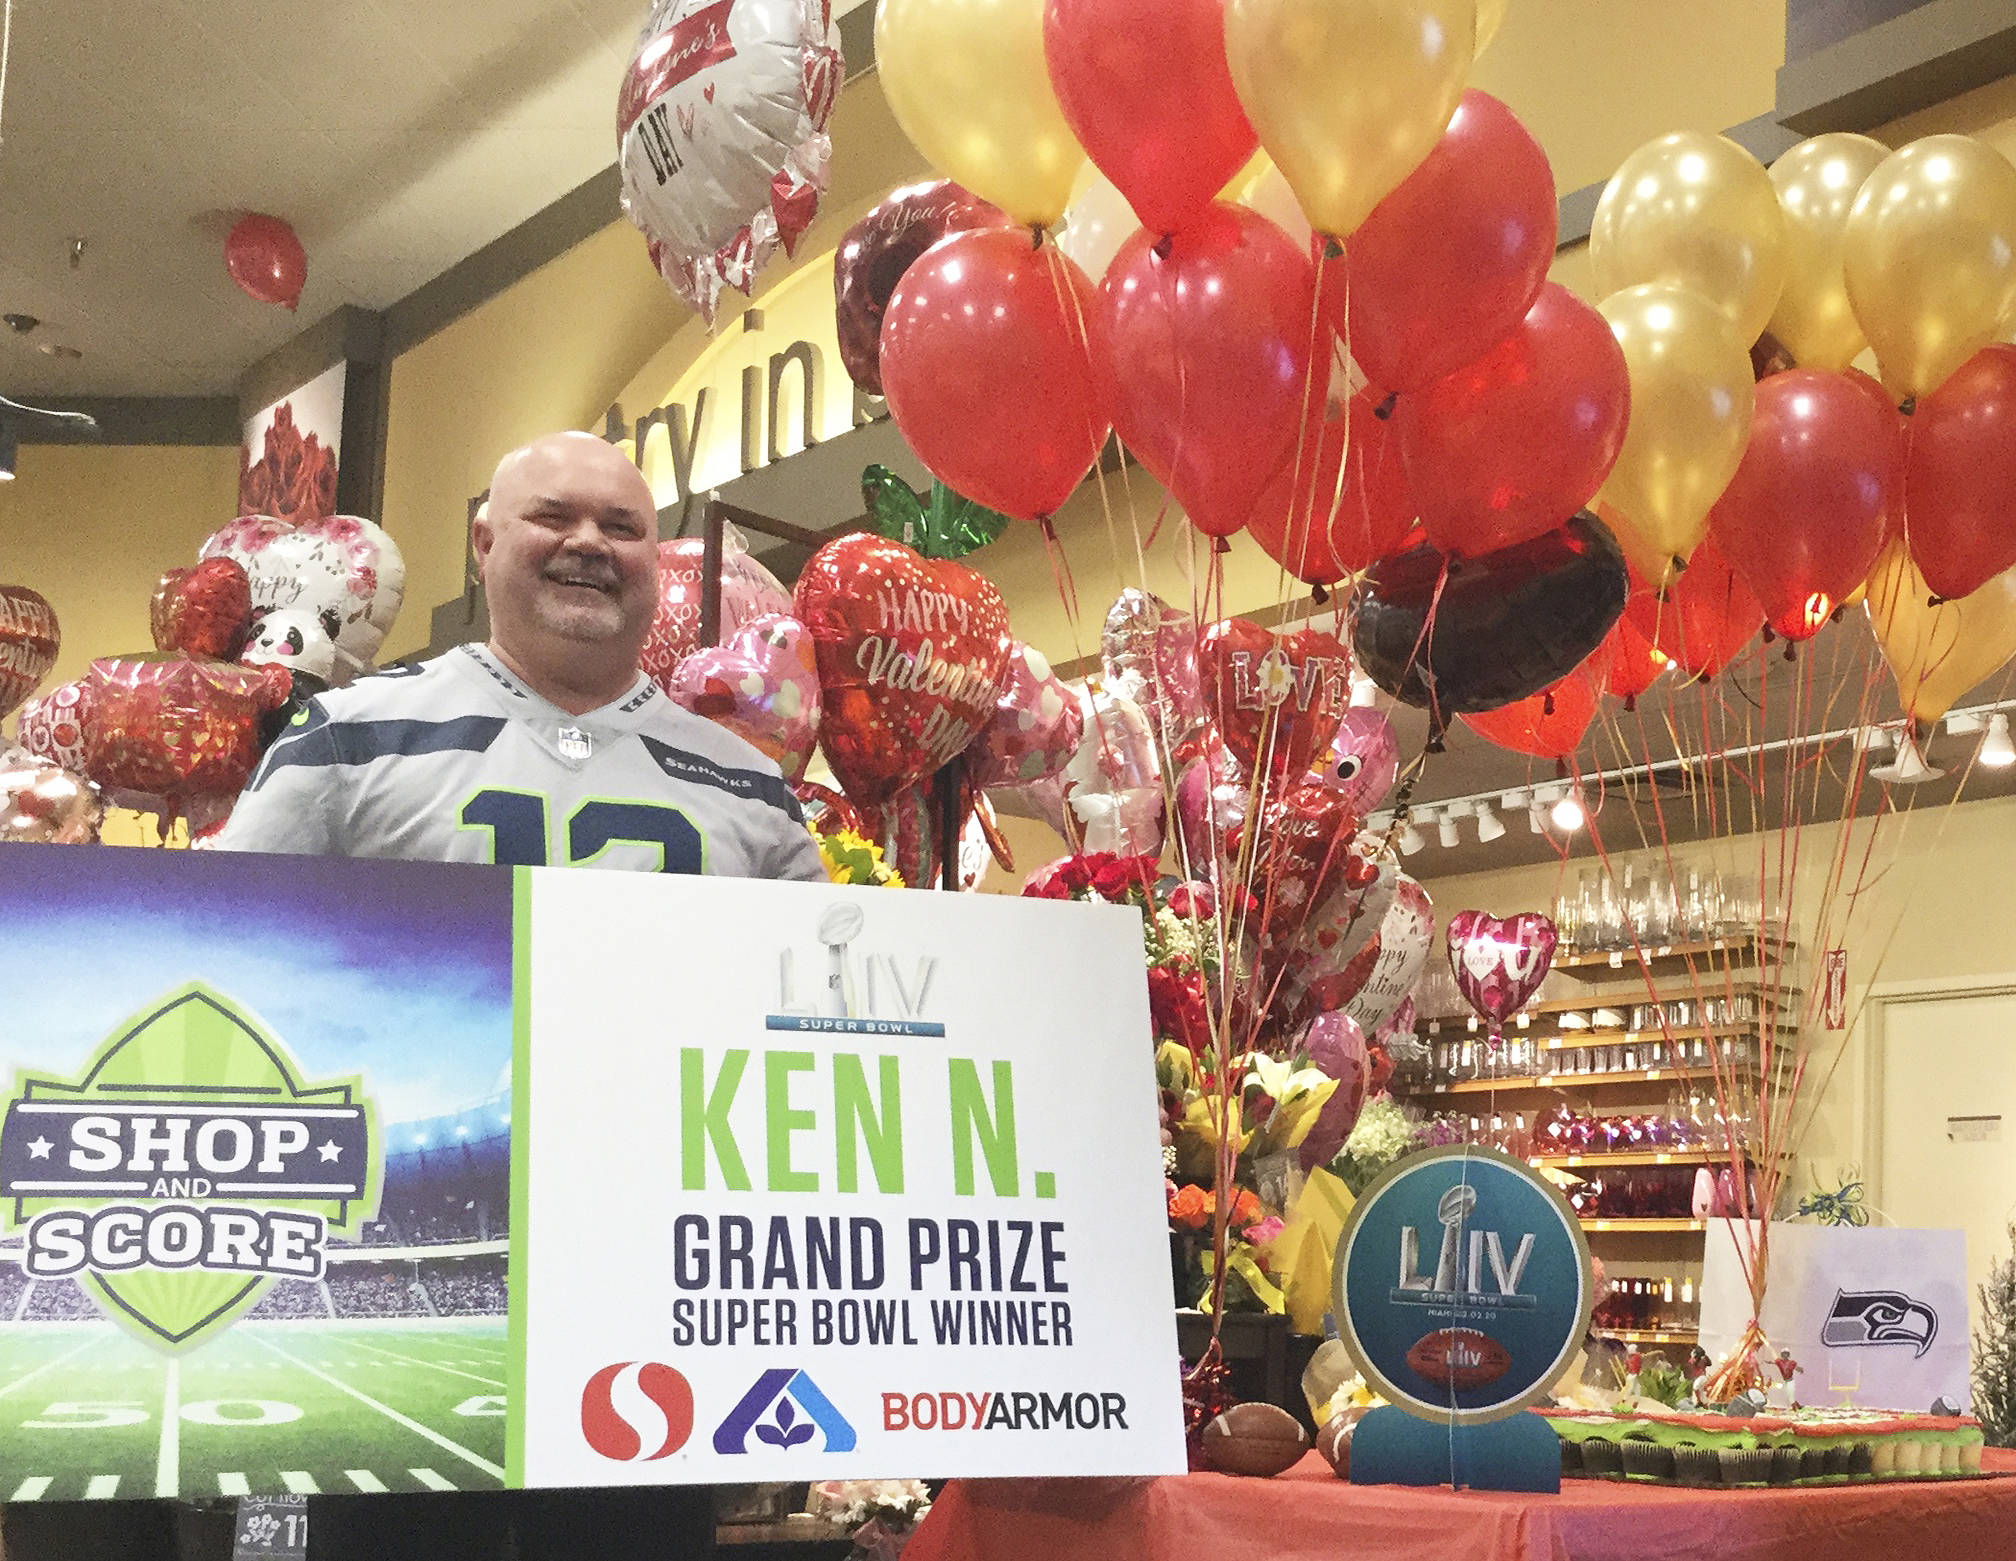 Arlington Safeway employee Ken Nobach celebrates winning two tickets and an all-expenses paid trip to this weekend’s Super Bowl LIV in Miami.